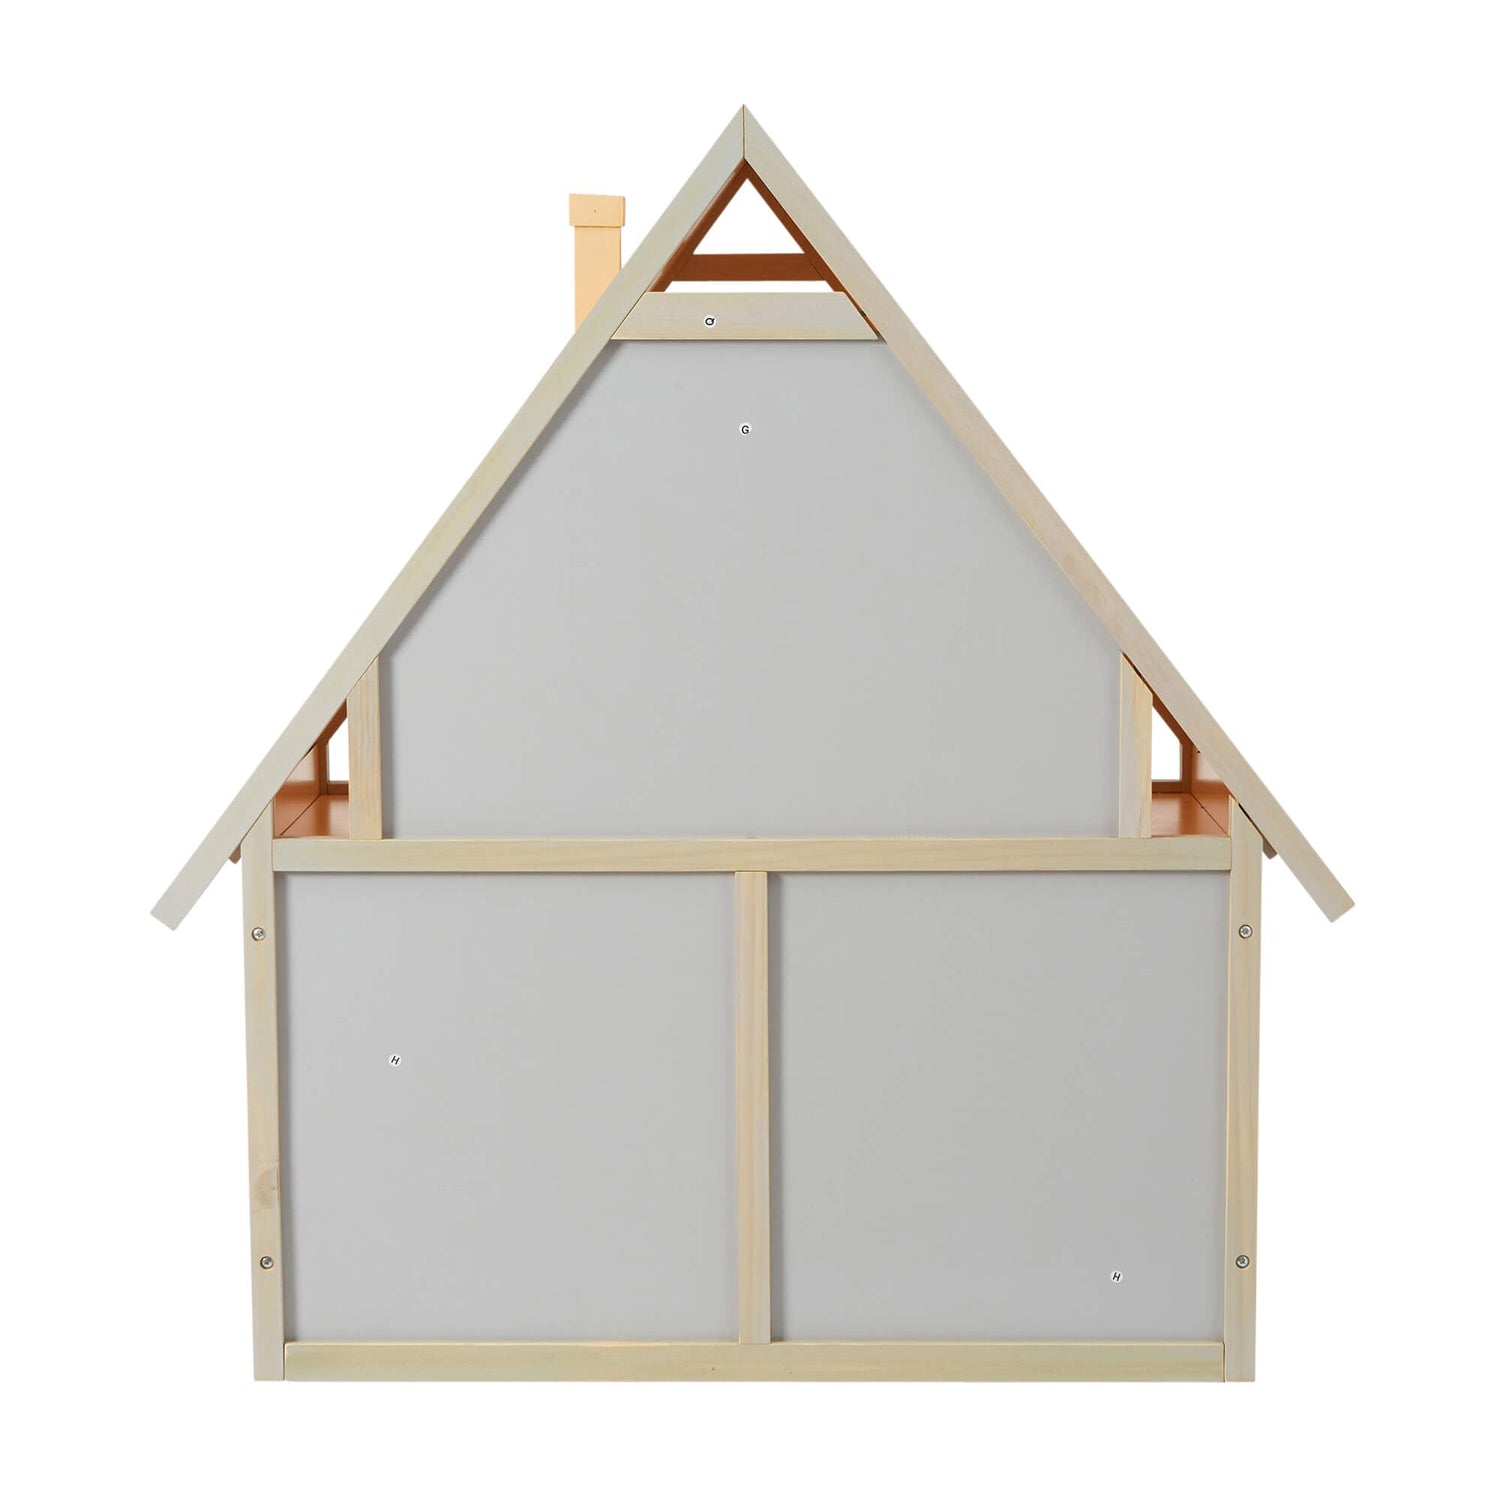 Dolls House Chalet Bookcase by Liberty House Toys